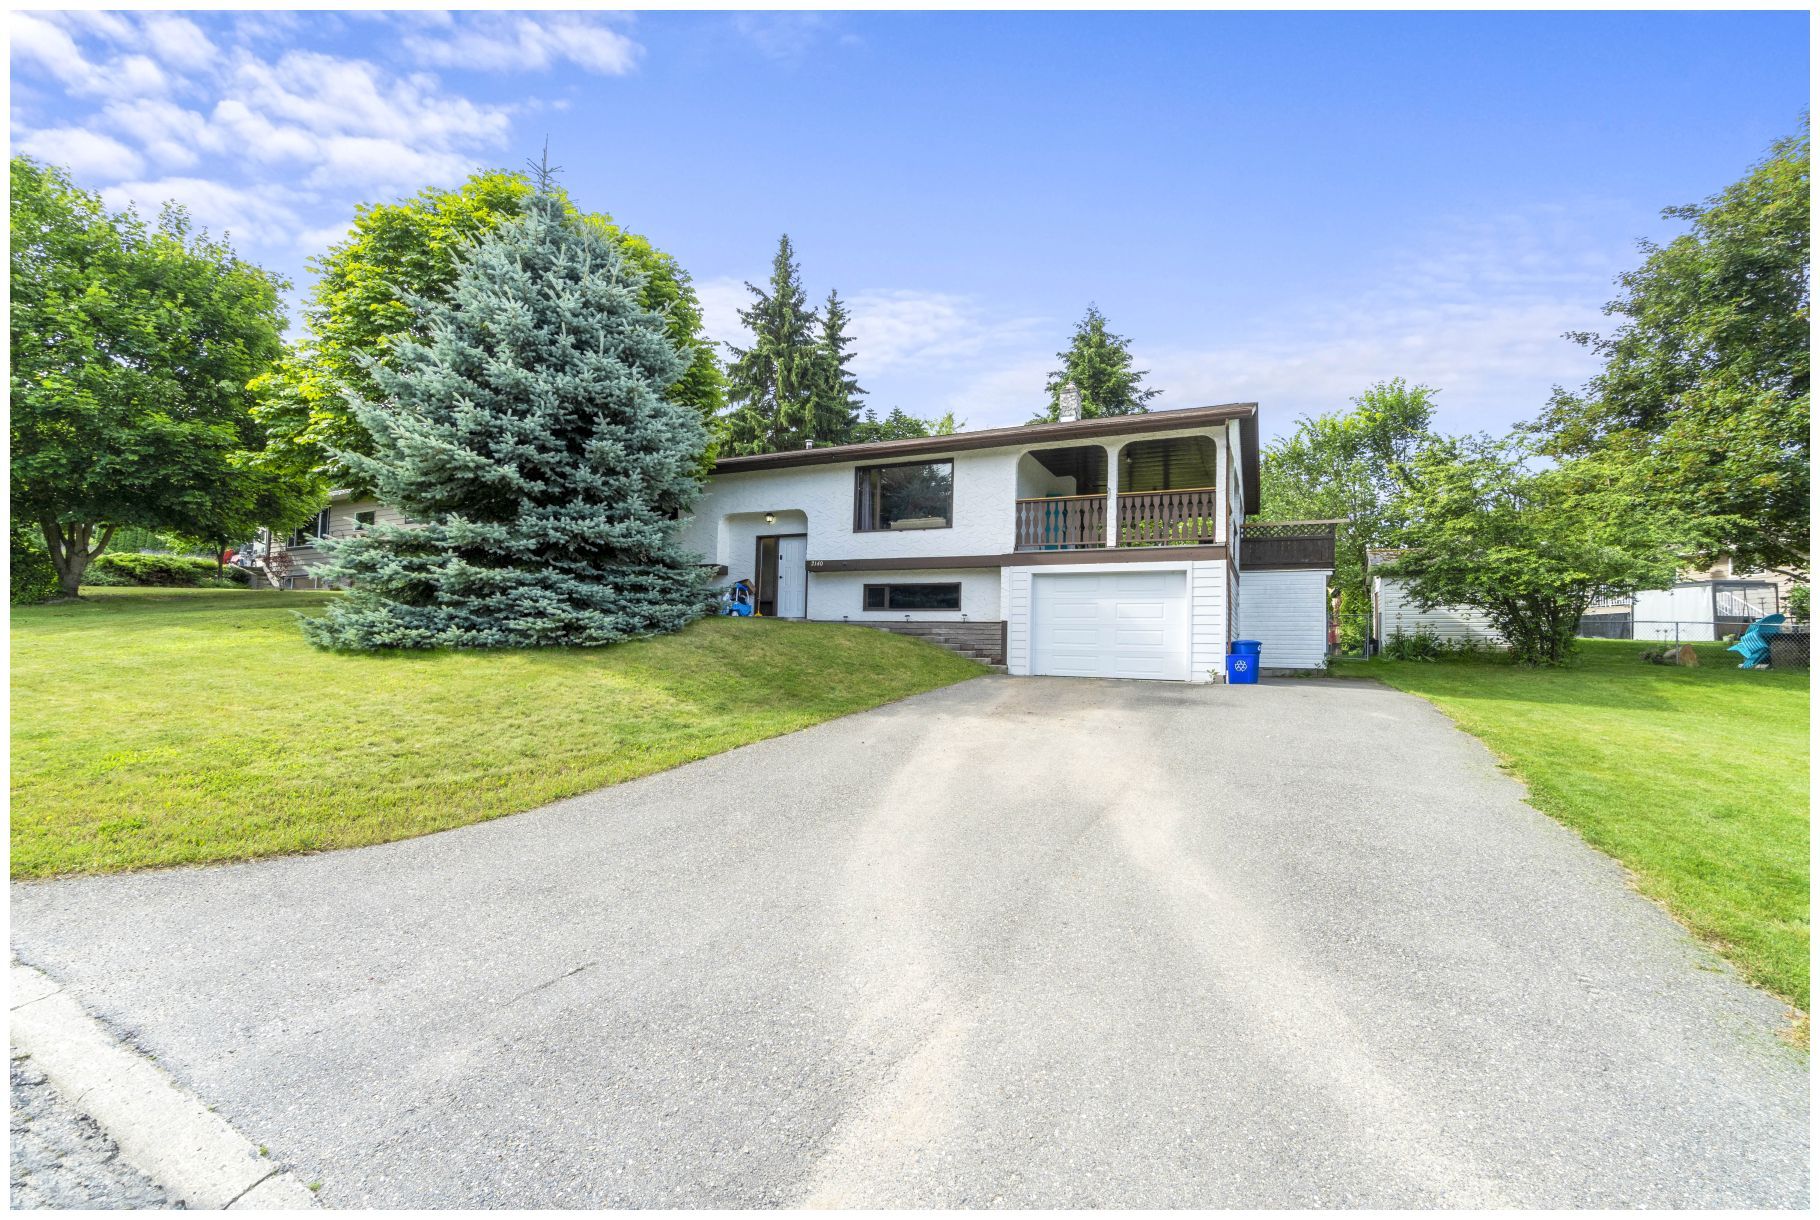 Main Photo: 2140 Northeast 23 Avenue in Salmon Arm: Upper Applewood House for sale : MLS®# 10210719